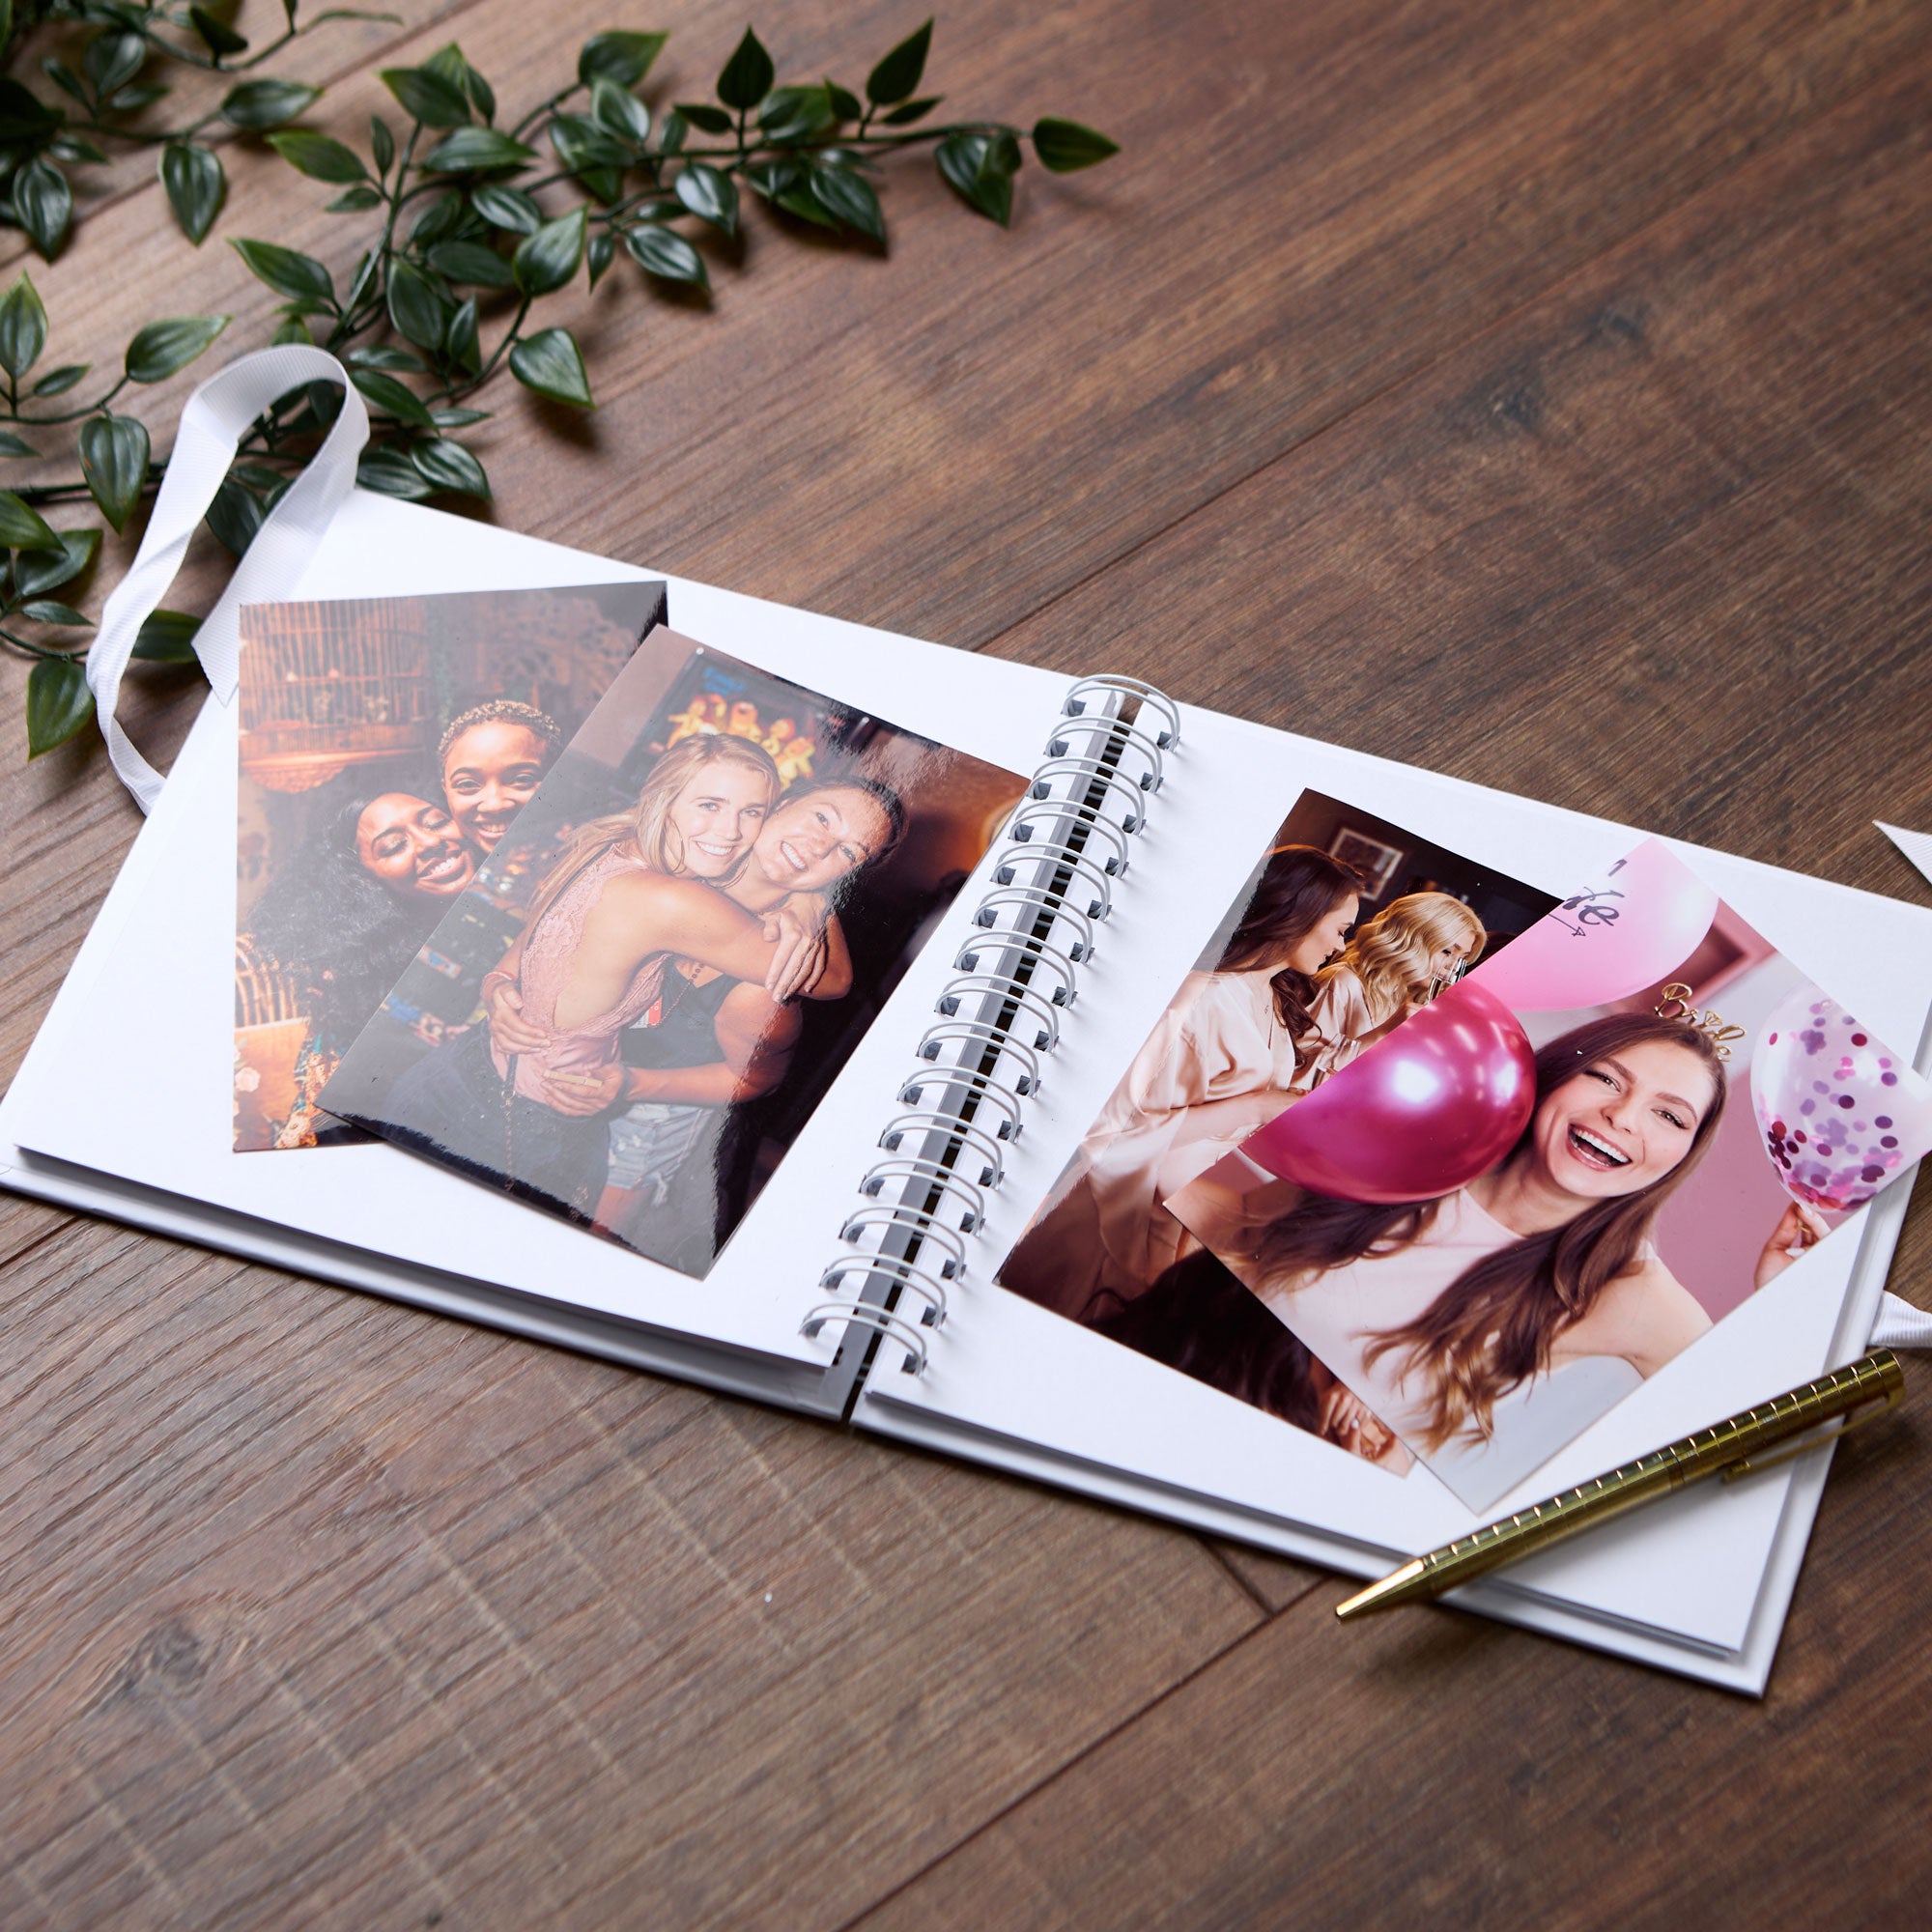 Personalised Communion Guest Book, Photo Album Featuring Sketch Church